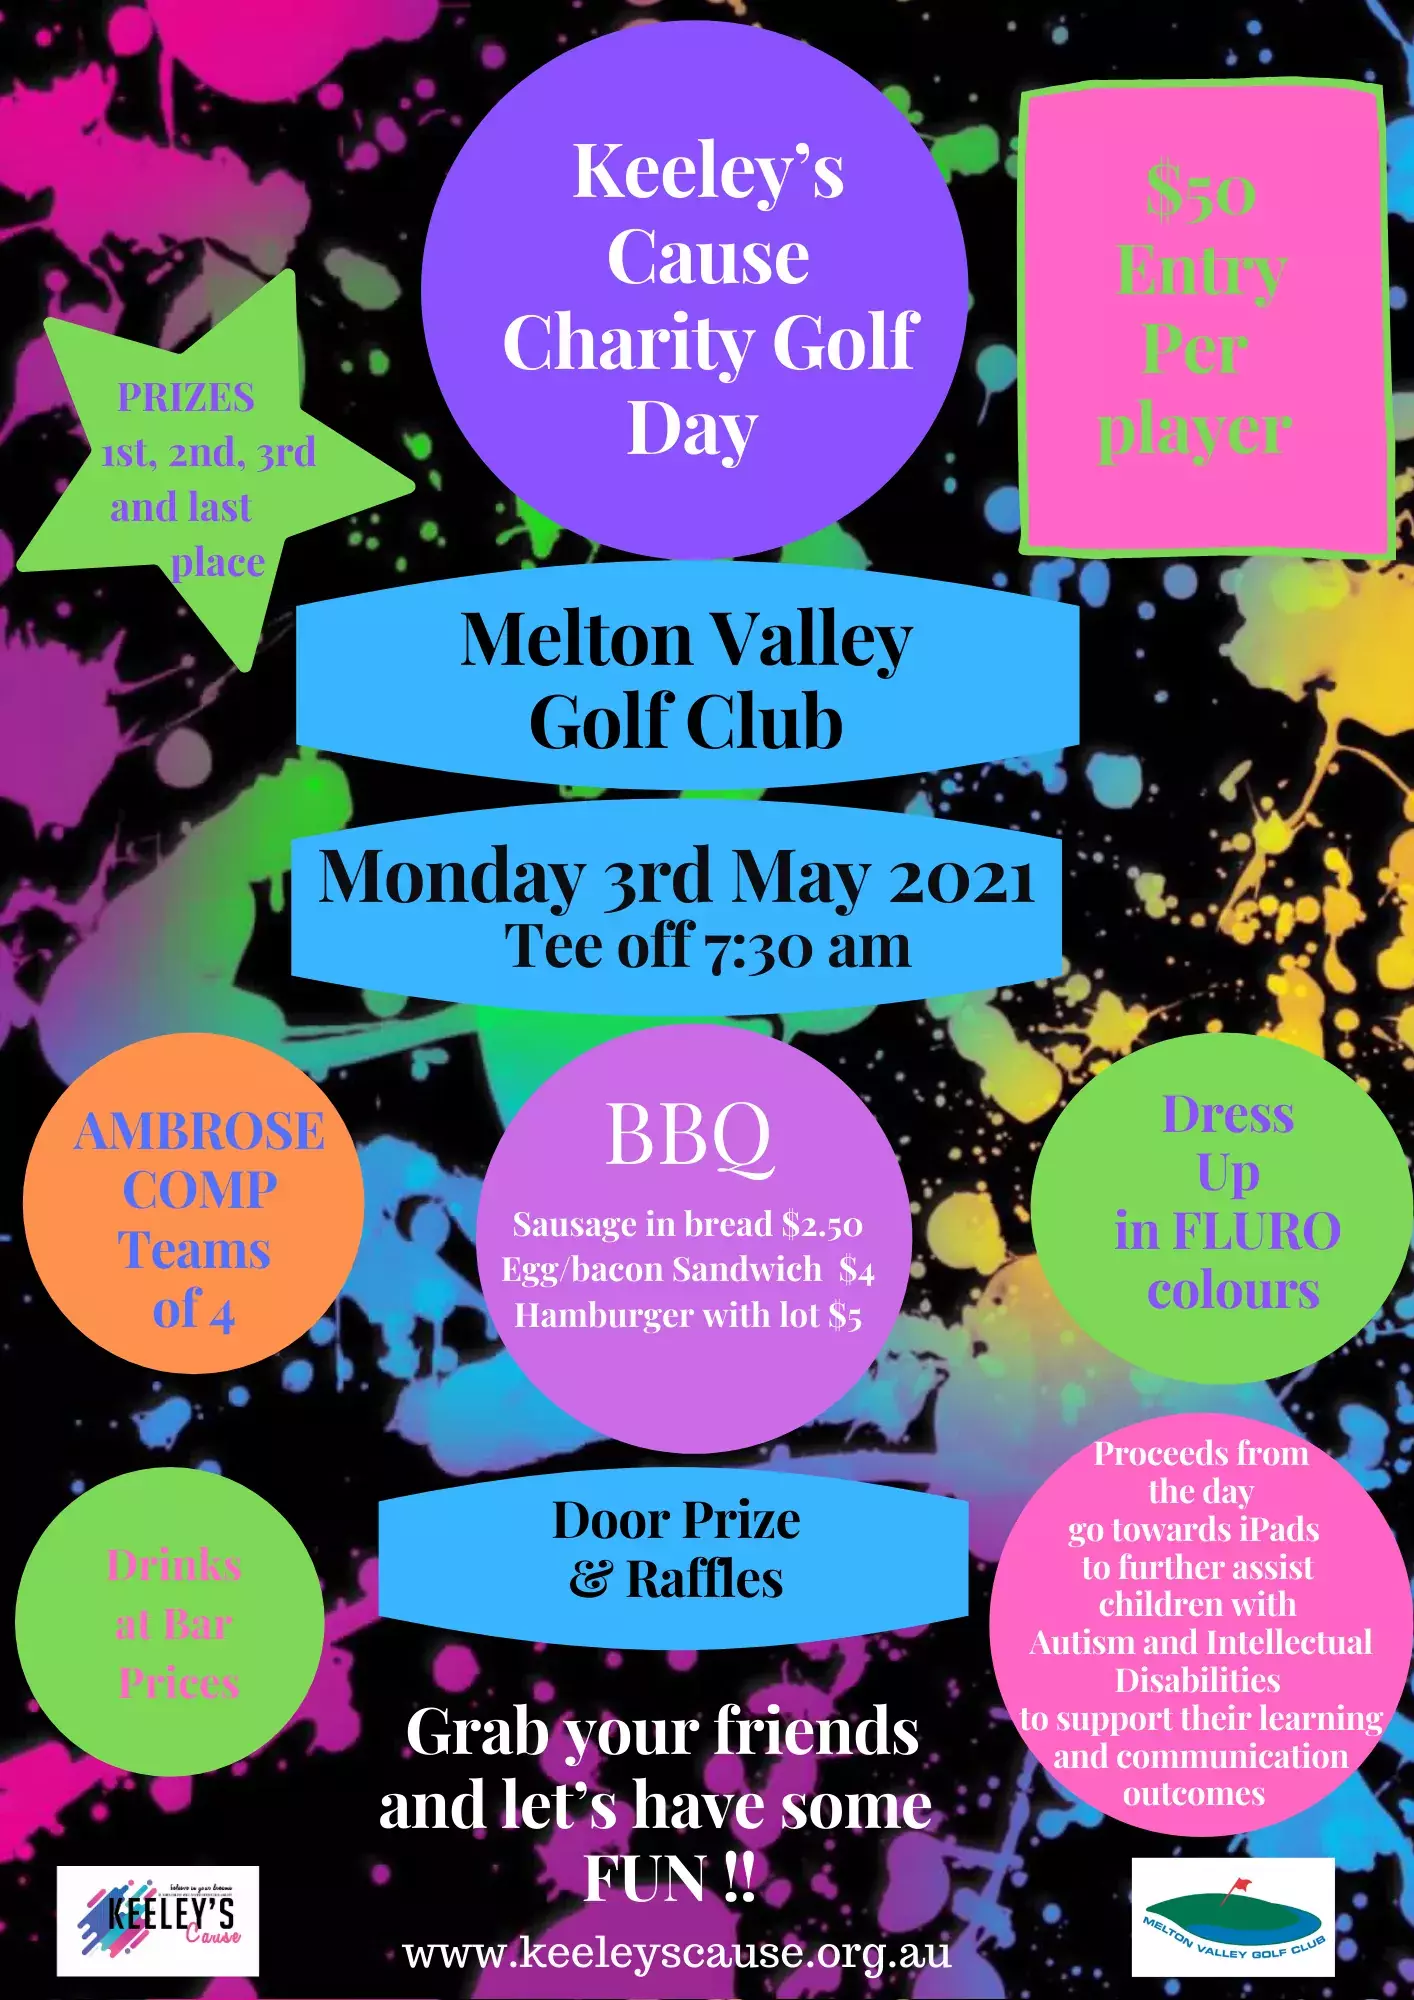 Keeley's Cause Charity Golf Day